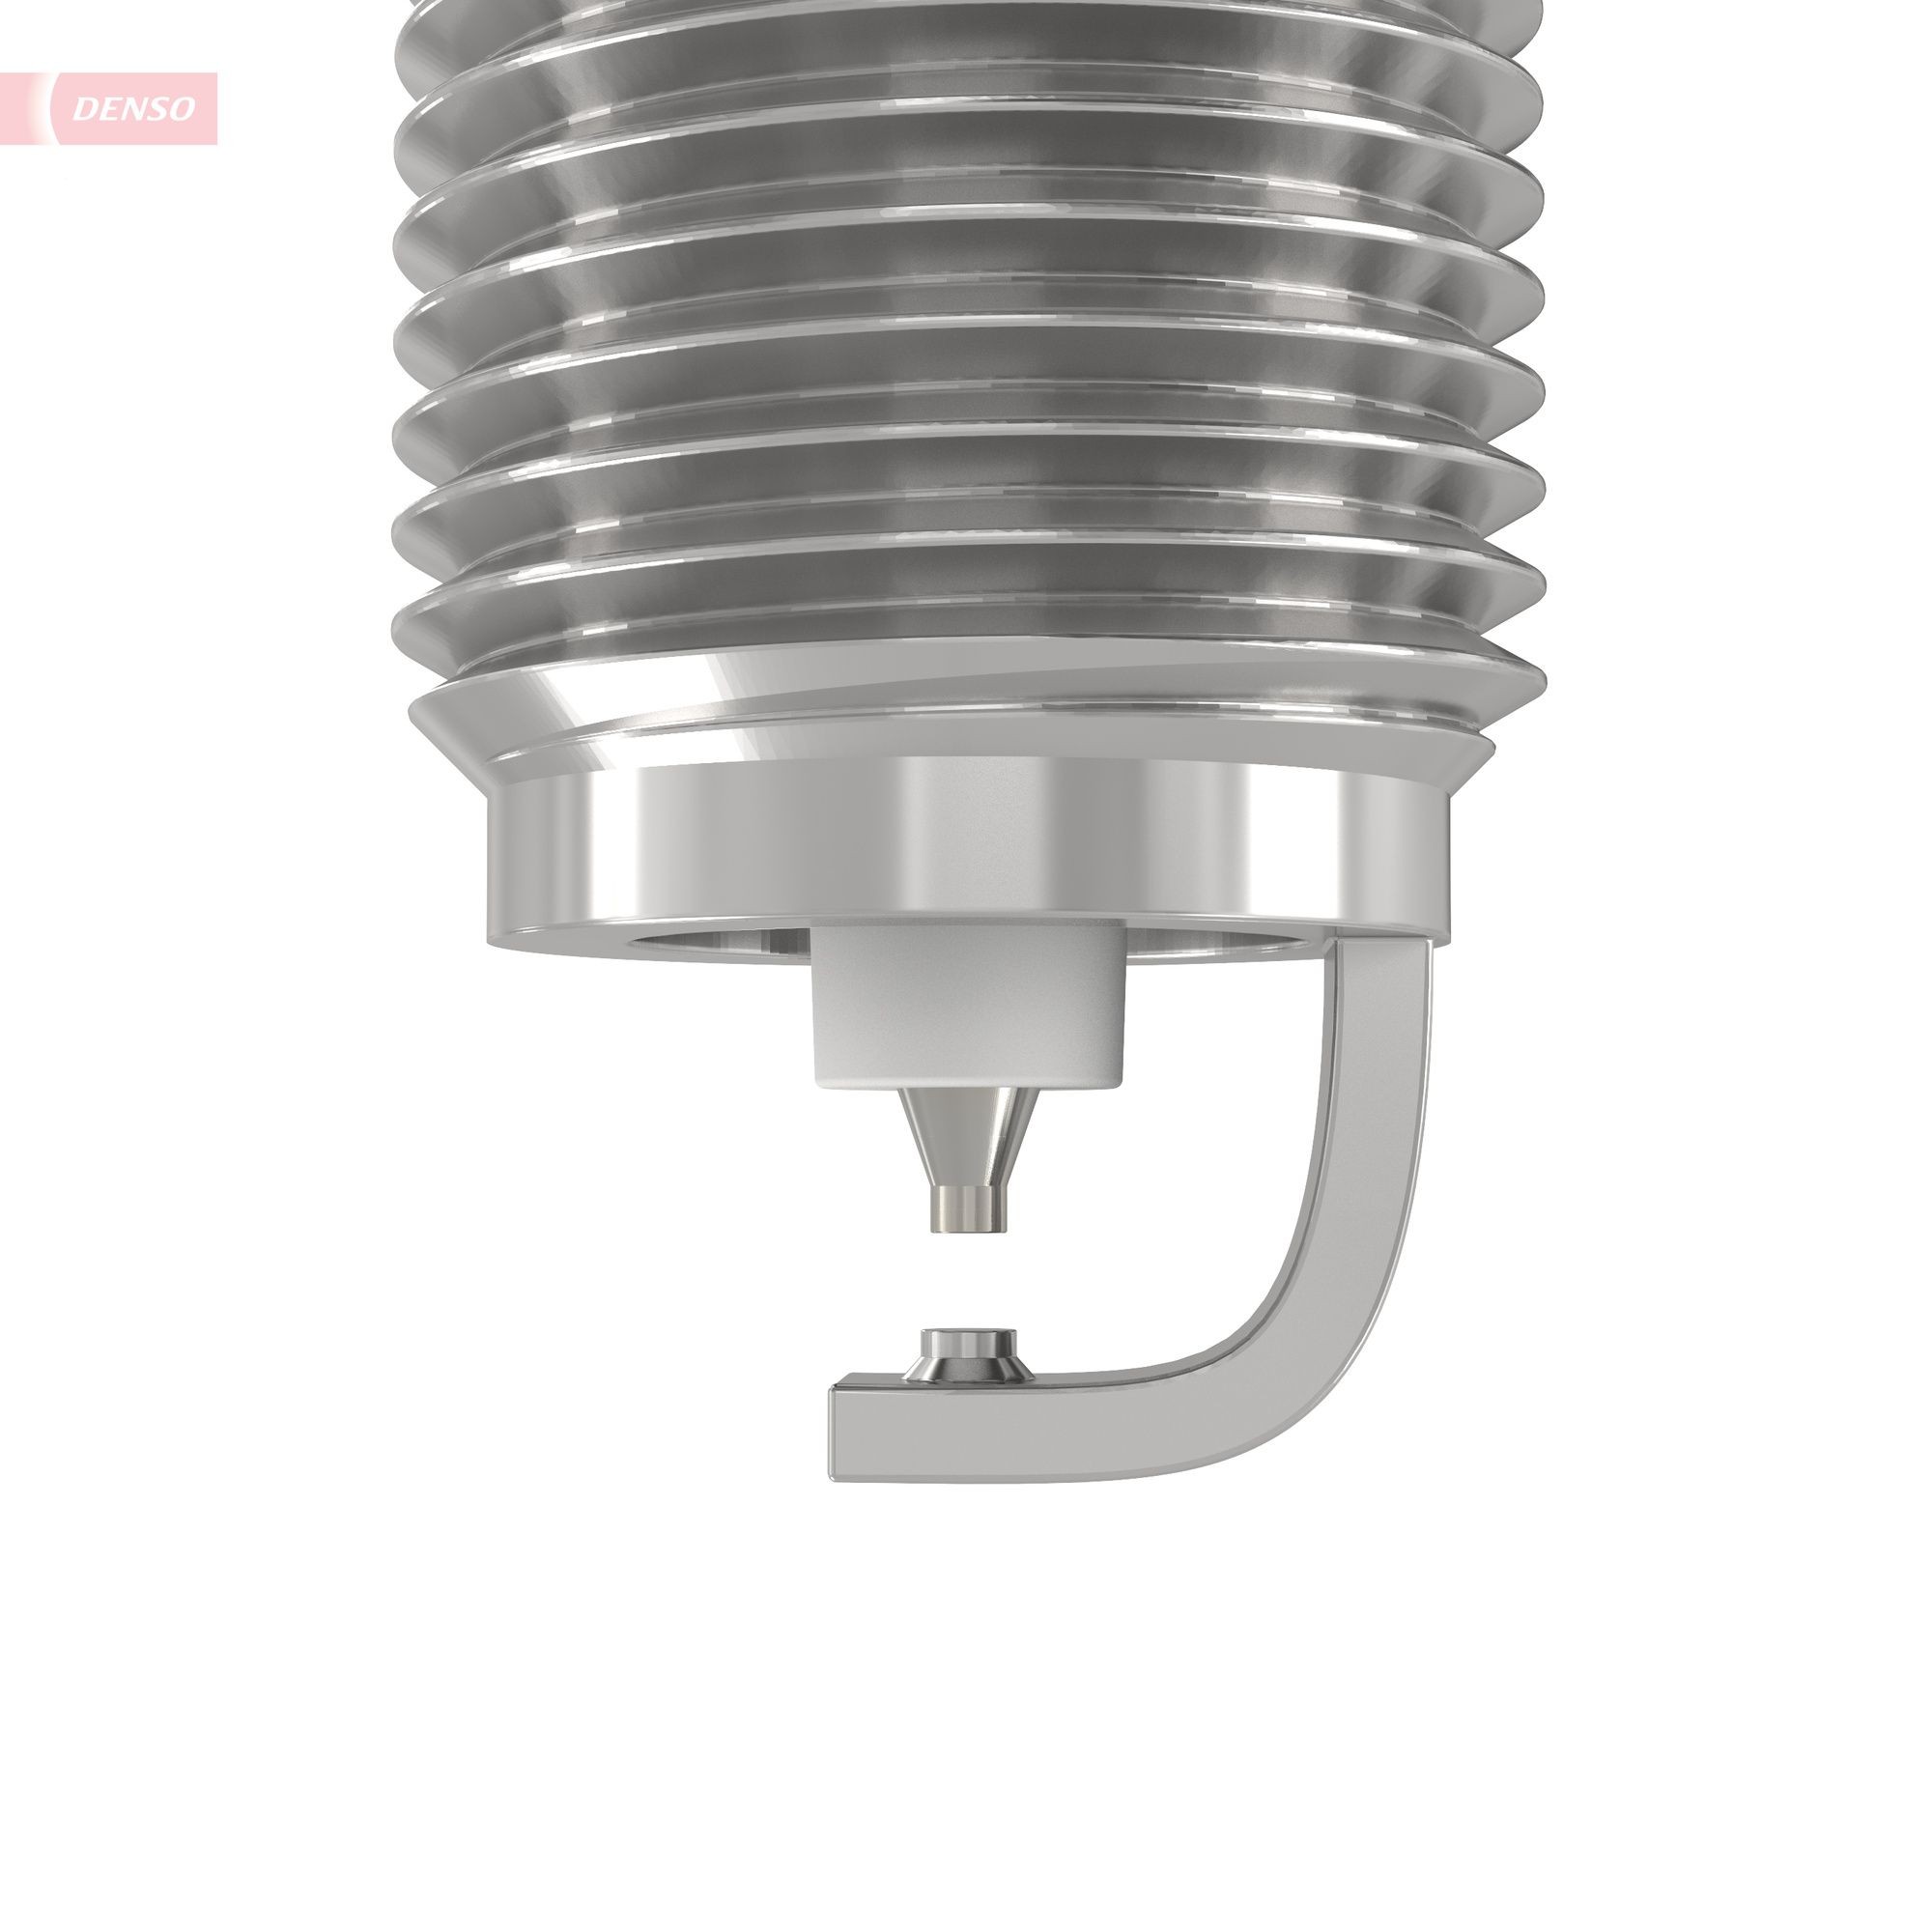 Spark plug EC22HPR-D7 from DENSO